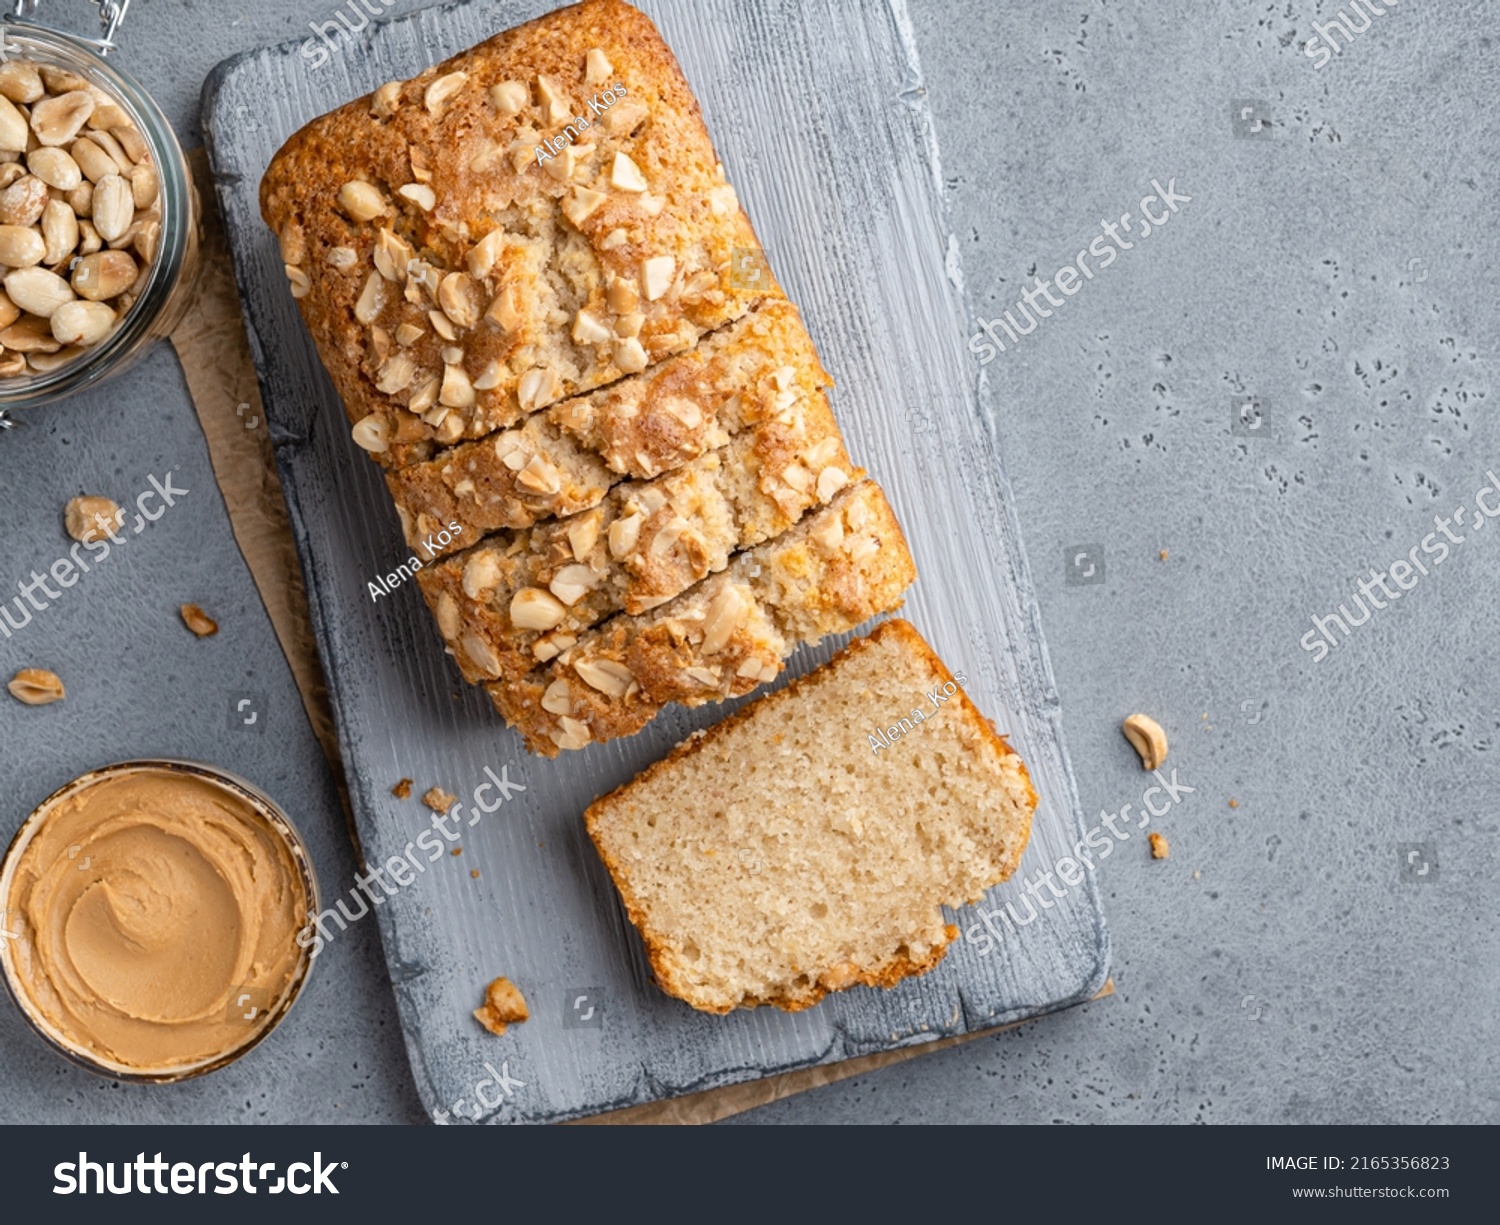 Loaf cake sliced on grey wooden cutting board. Homemade cake made of peanut butter, peanut flour and cinnamon decorated with chopped nuts. Top view. Copy space, gray concrete background. #2165356823